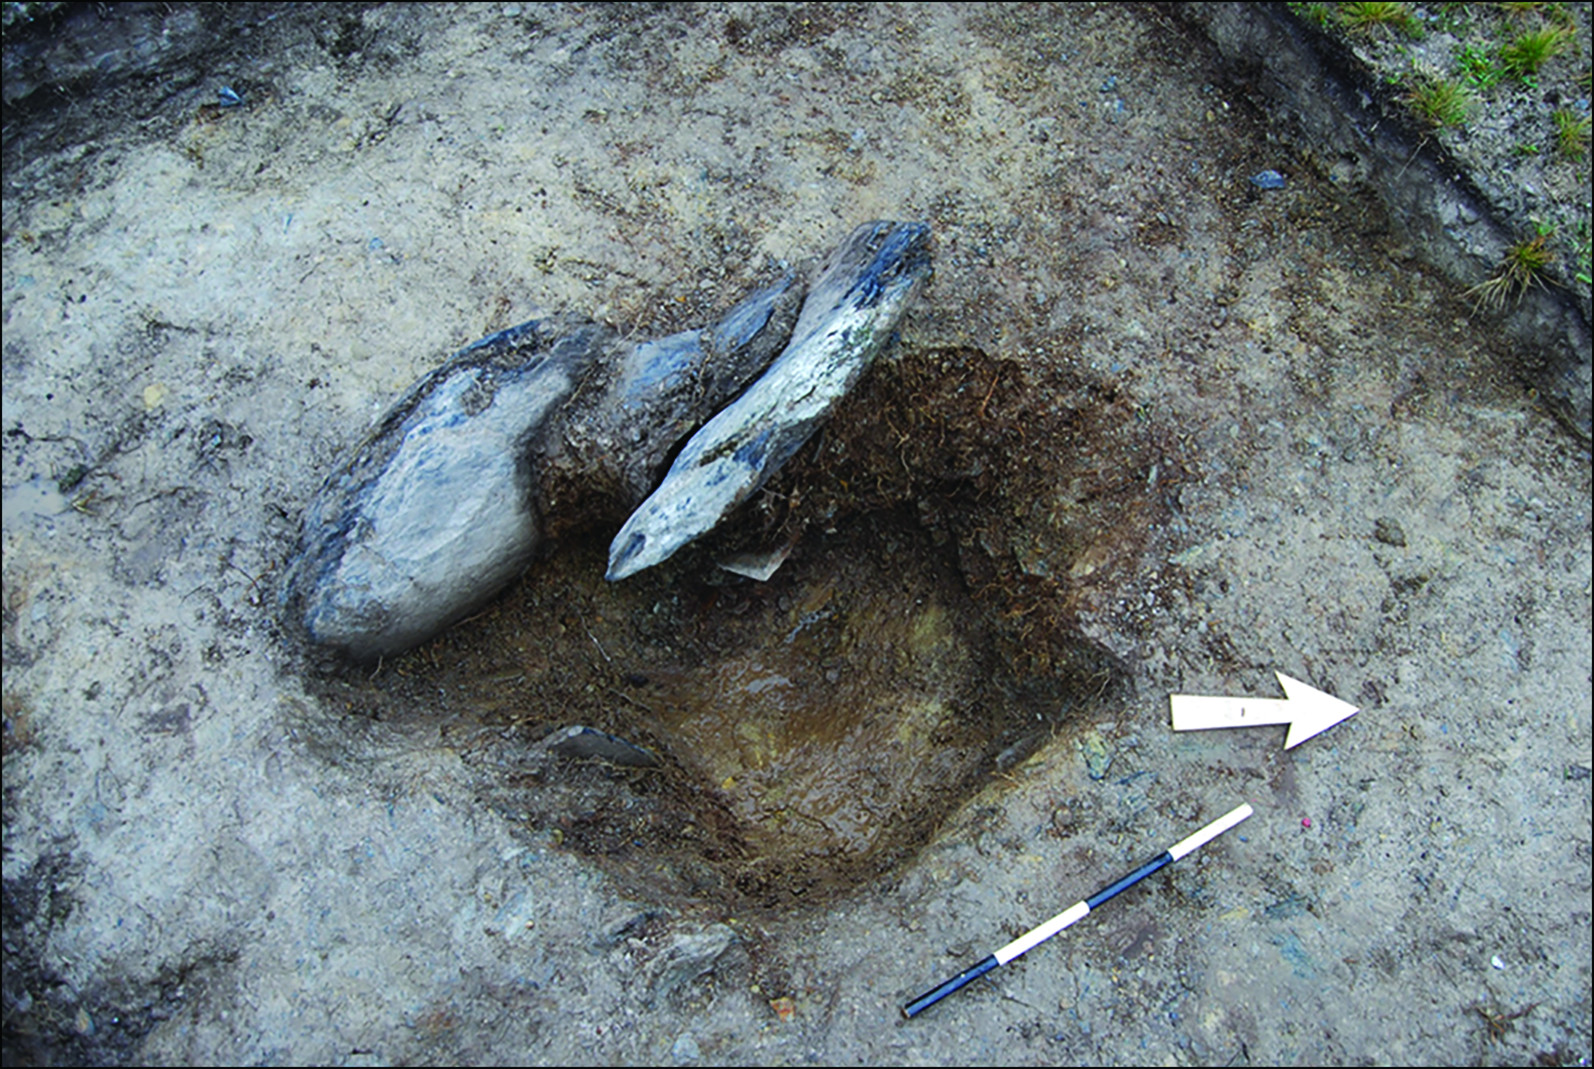 A stonehole uncovered at Waun Mawn, including the packing used to secure the missing stone. (Image: M. P. Pearson et al., 2021/Antiquity)